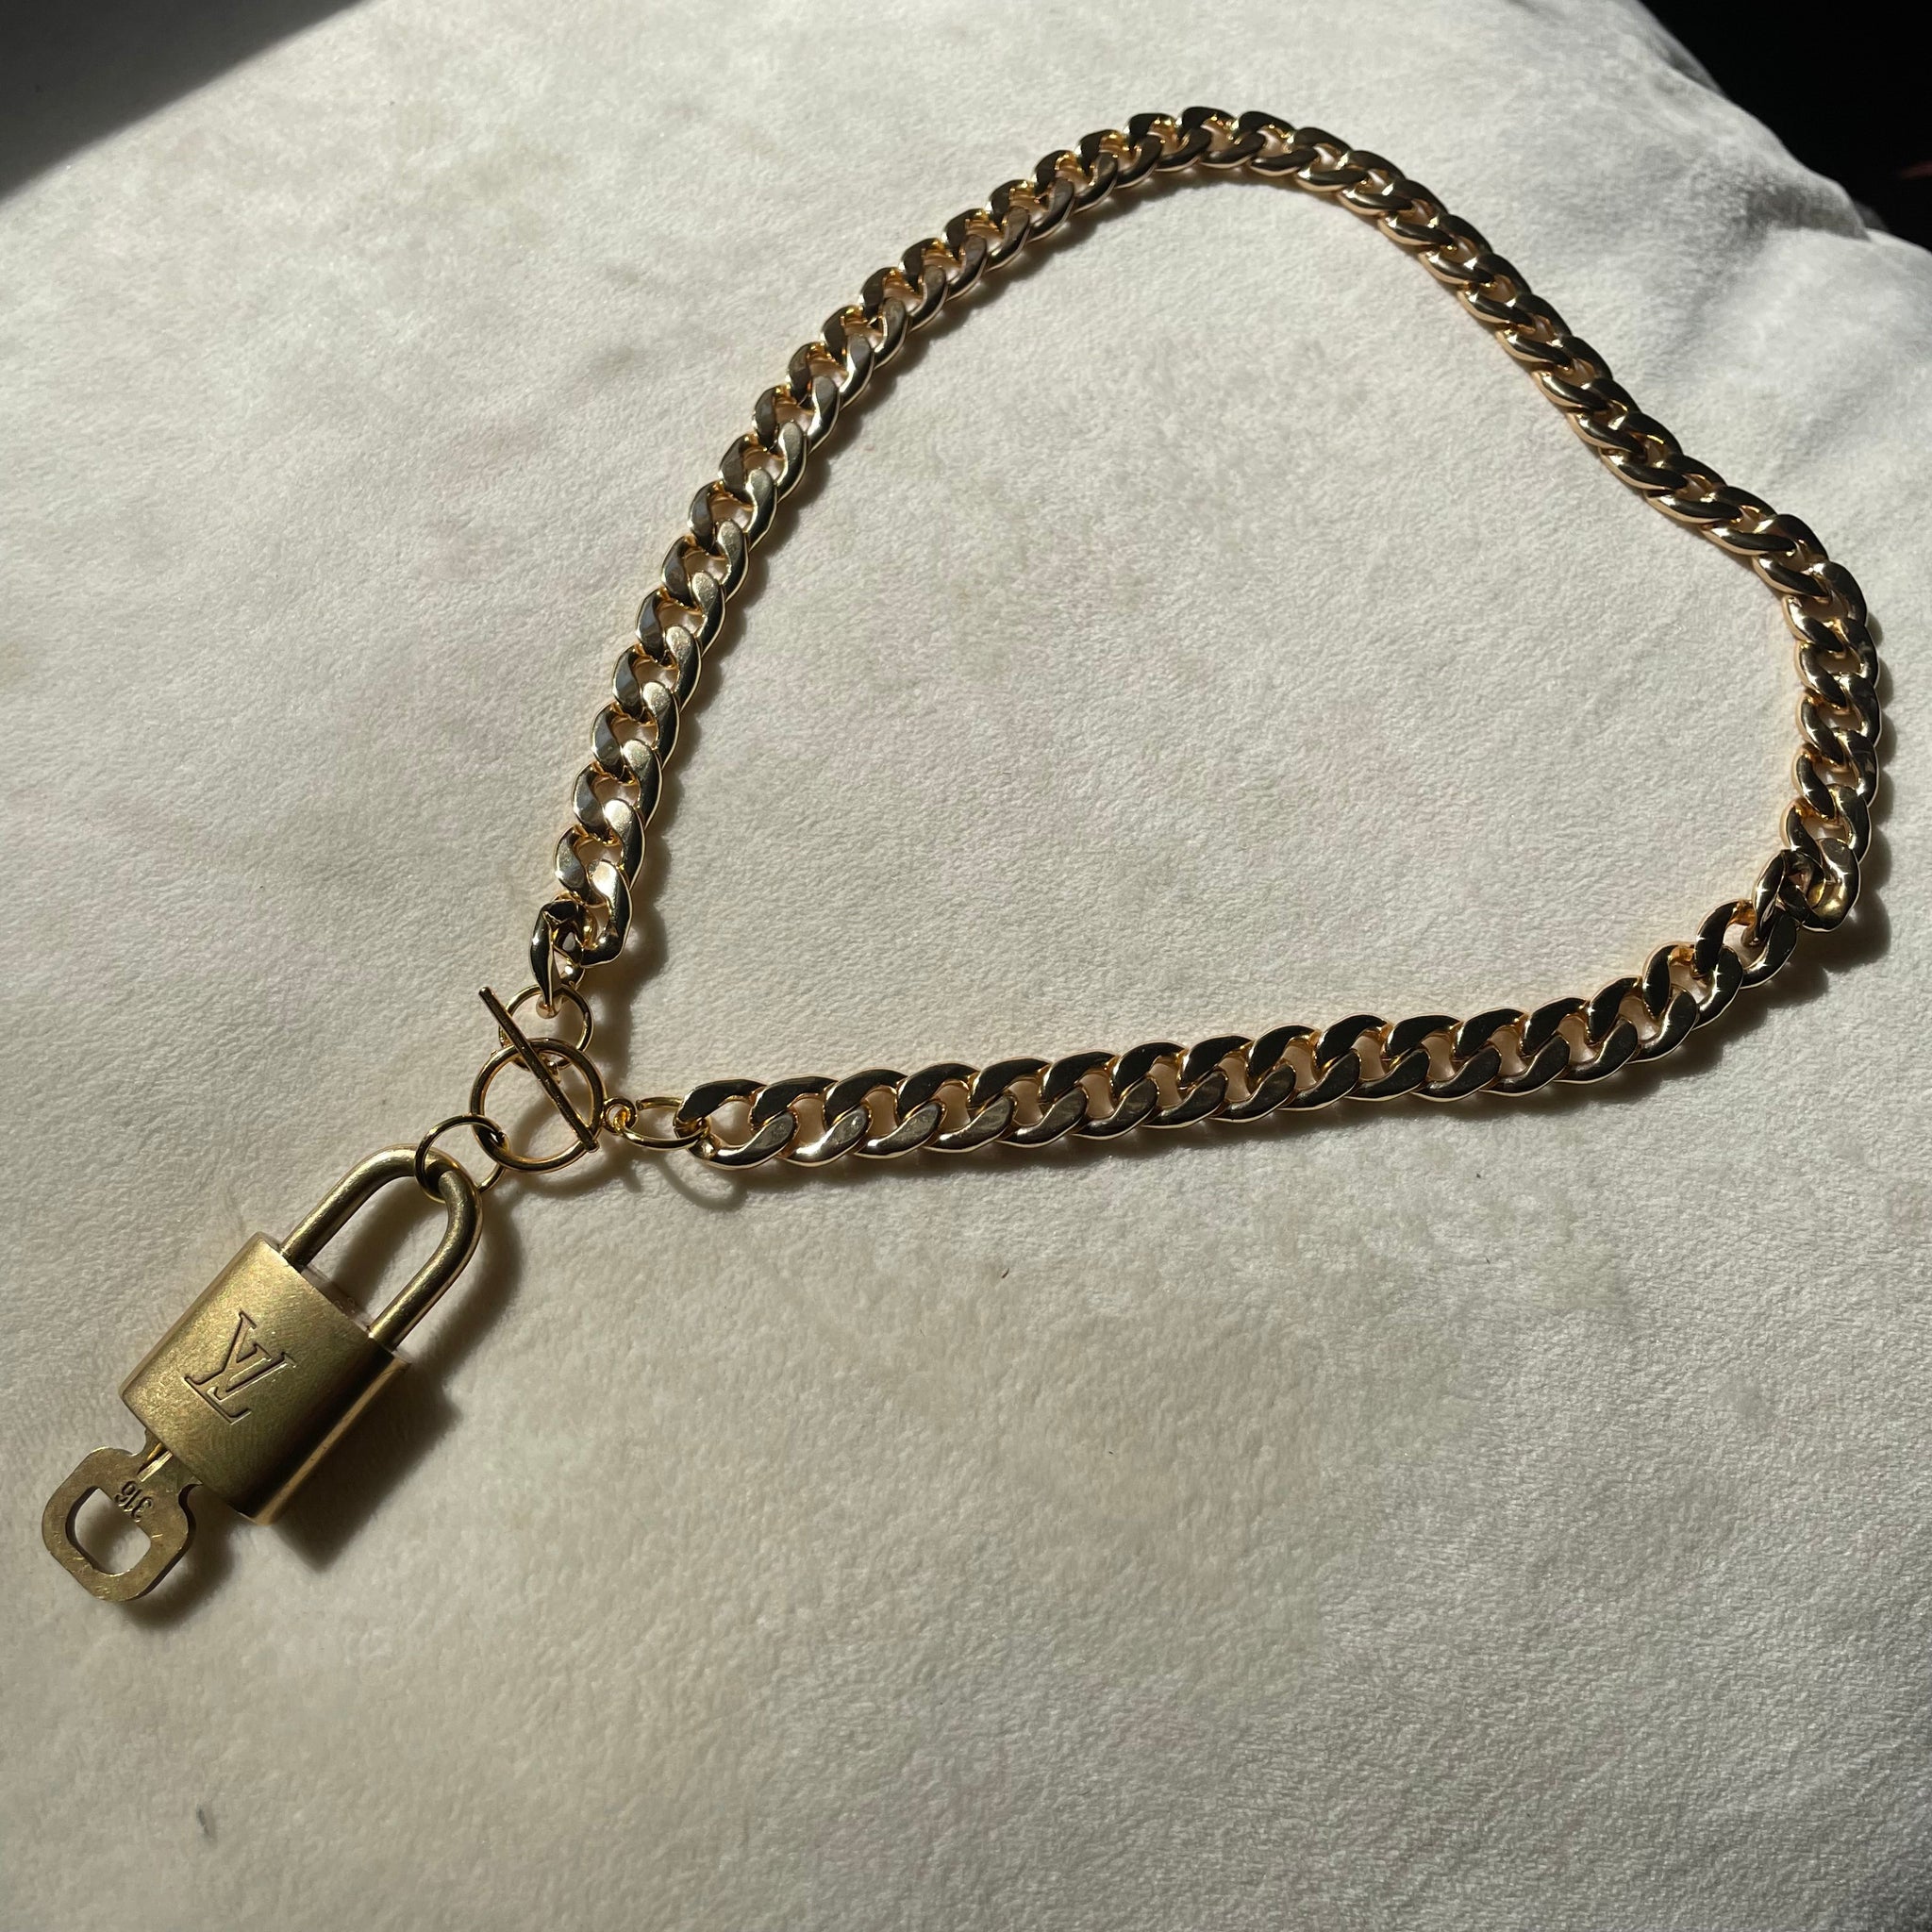 Rework Louis Vuitton Lock With Key on Necklace